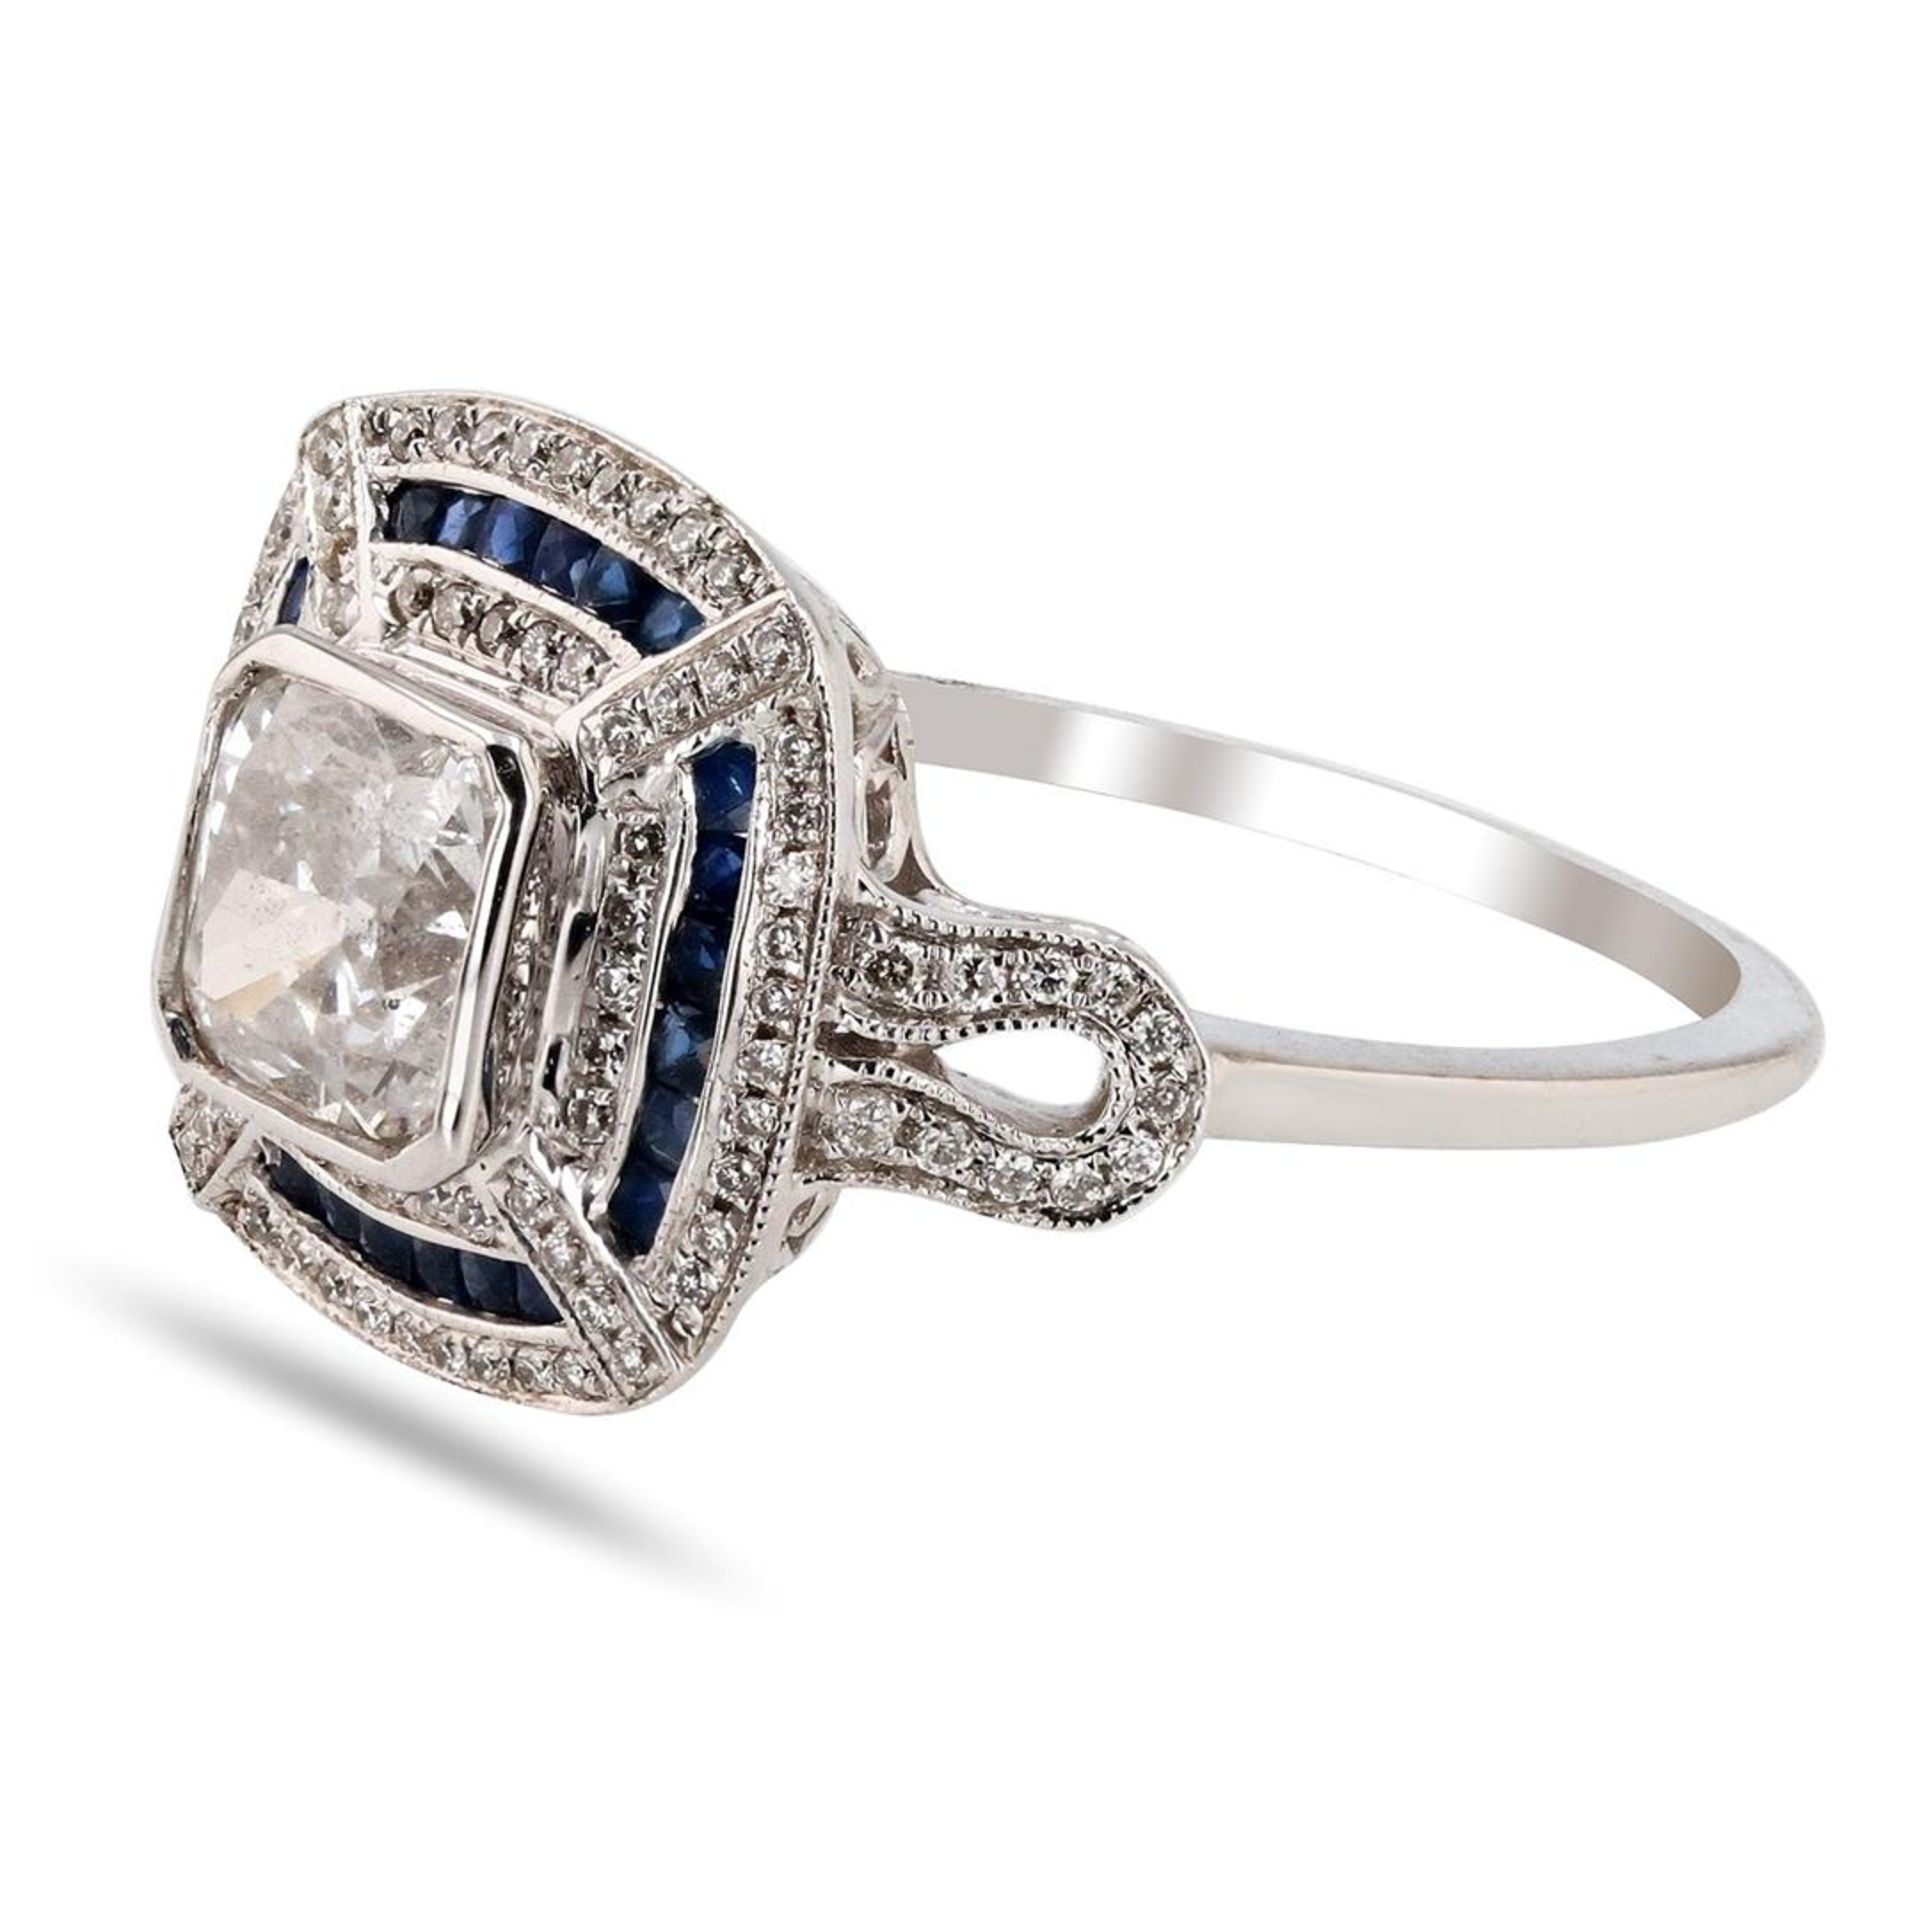 1.22 ctw Diamond and 0.36 ctw Blue Sapphire 18K White Gold Ring - Image 2 of 4